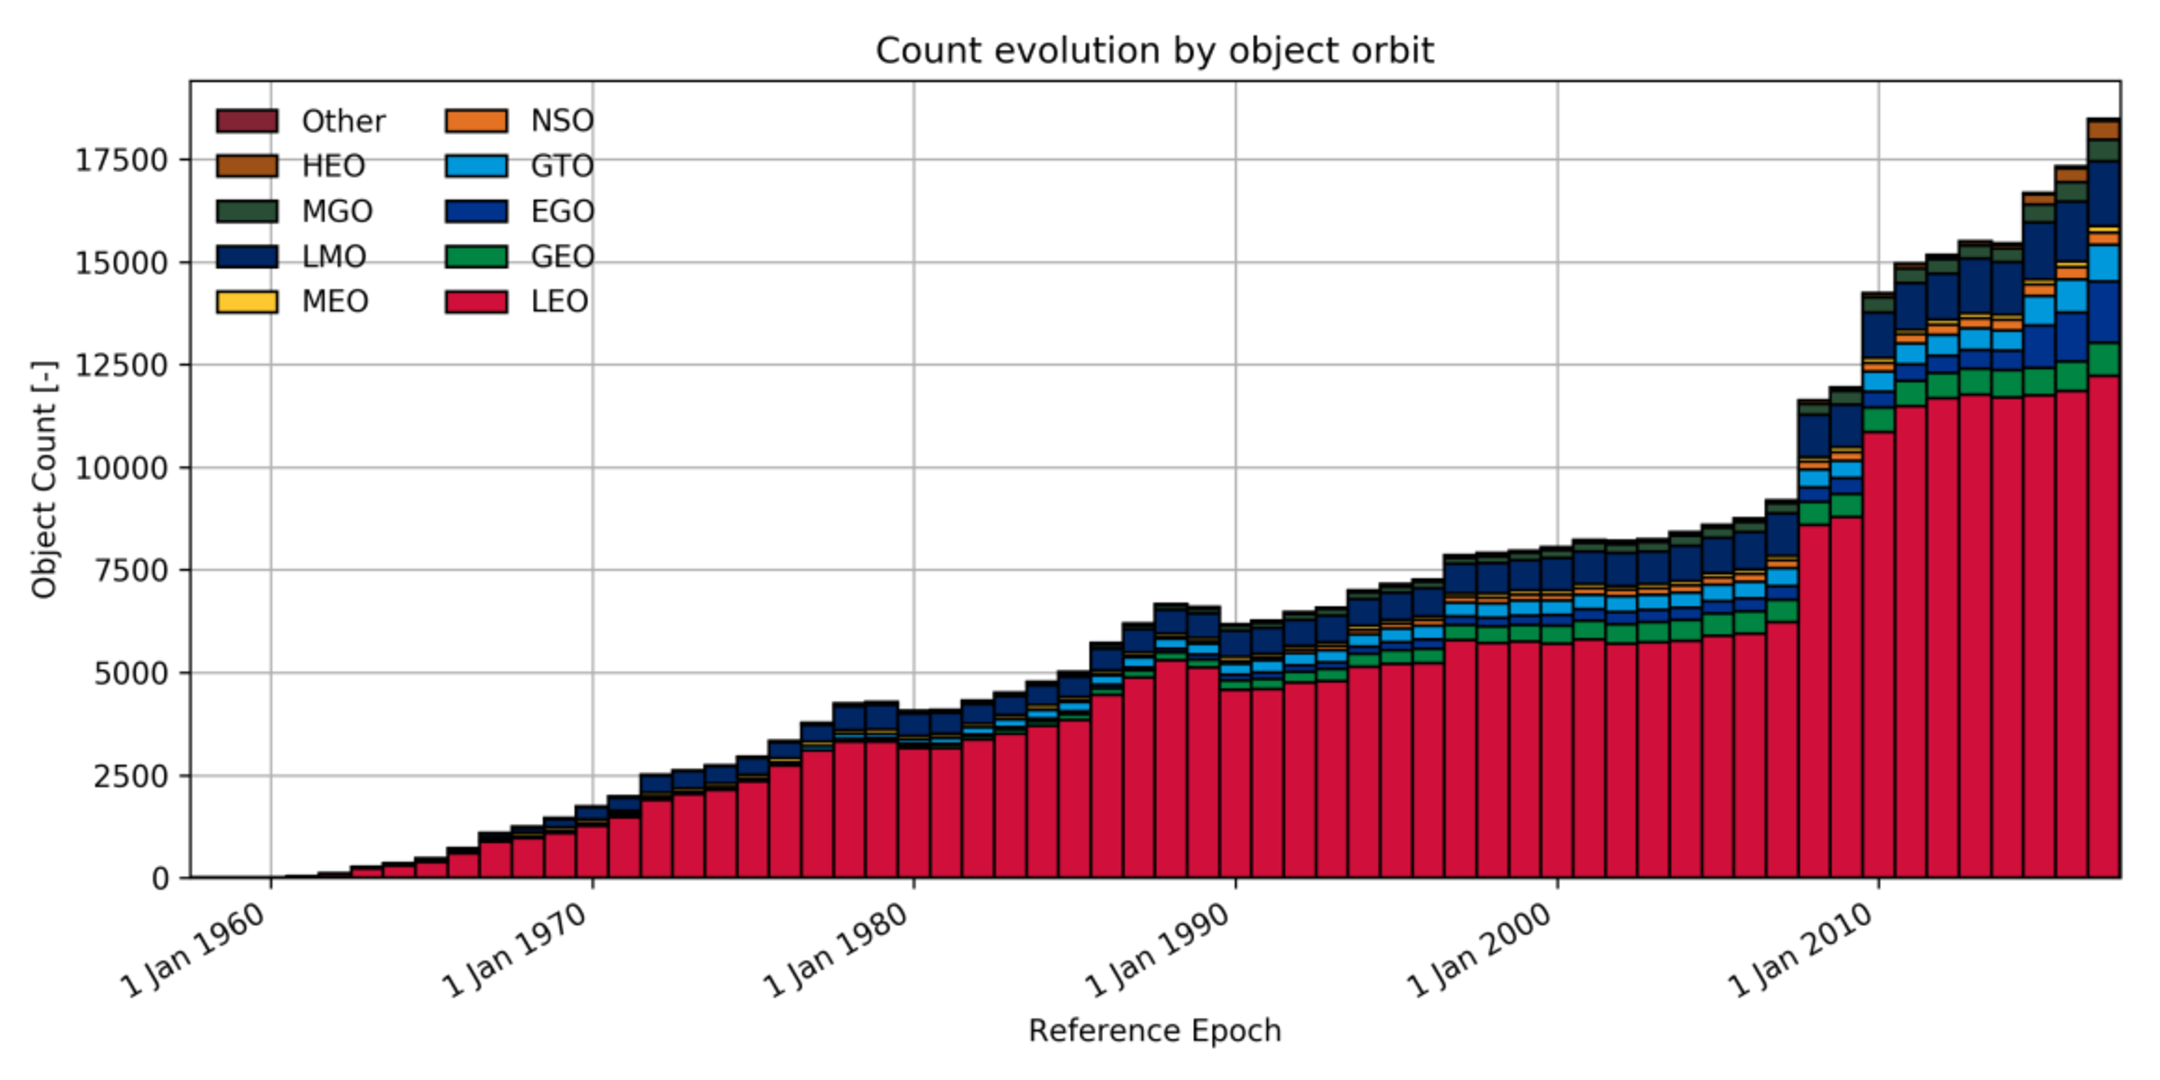 Evolution of space object population